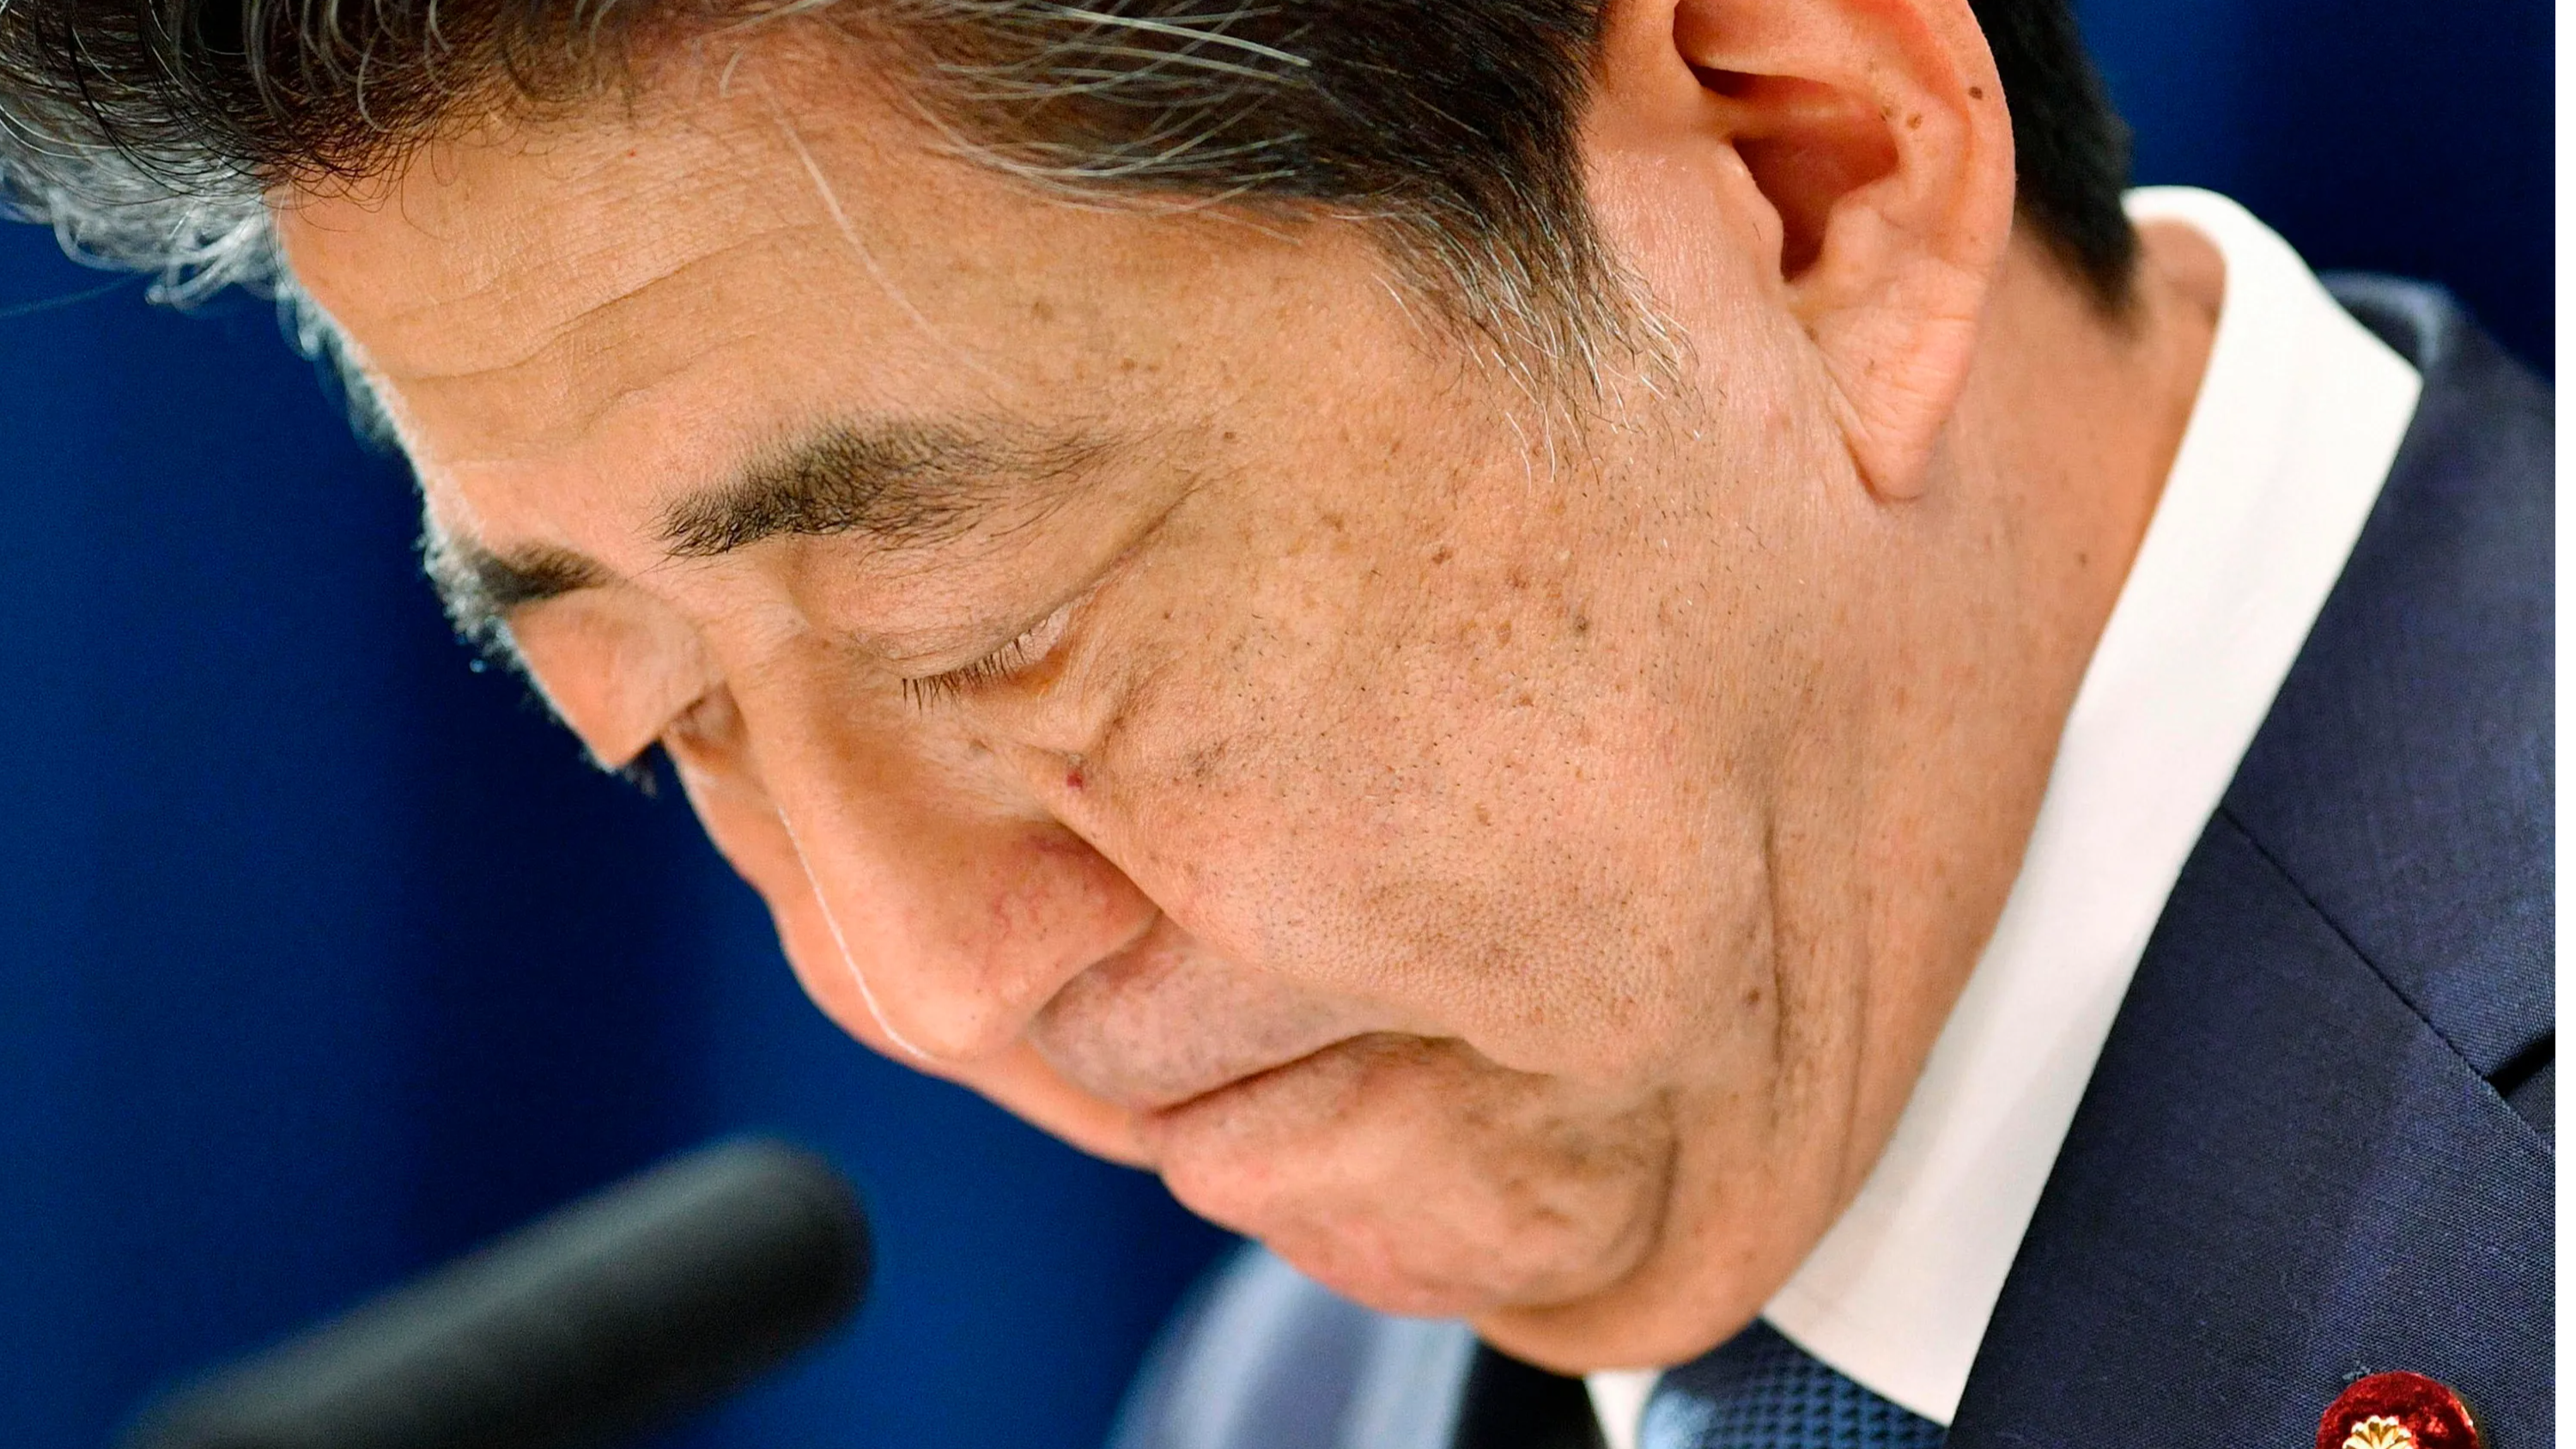 Japan’s ruling party to vote for Shinzo Abe’s successor on September 14